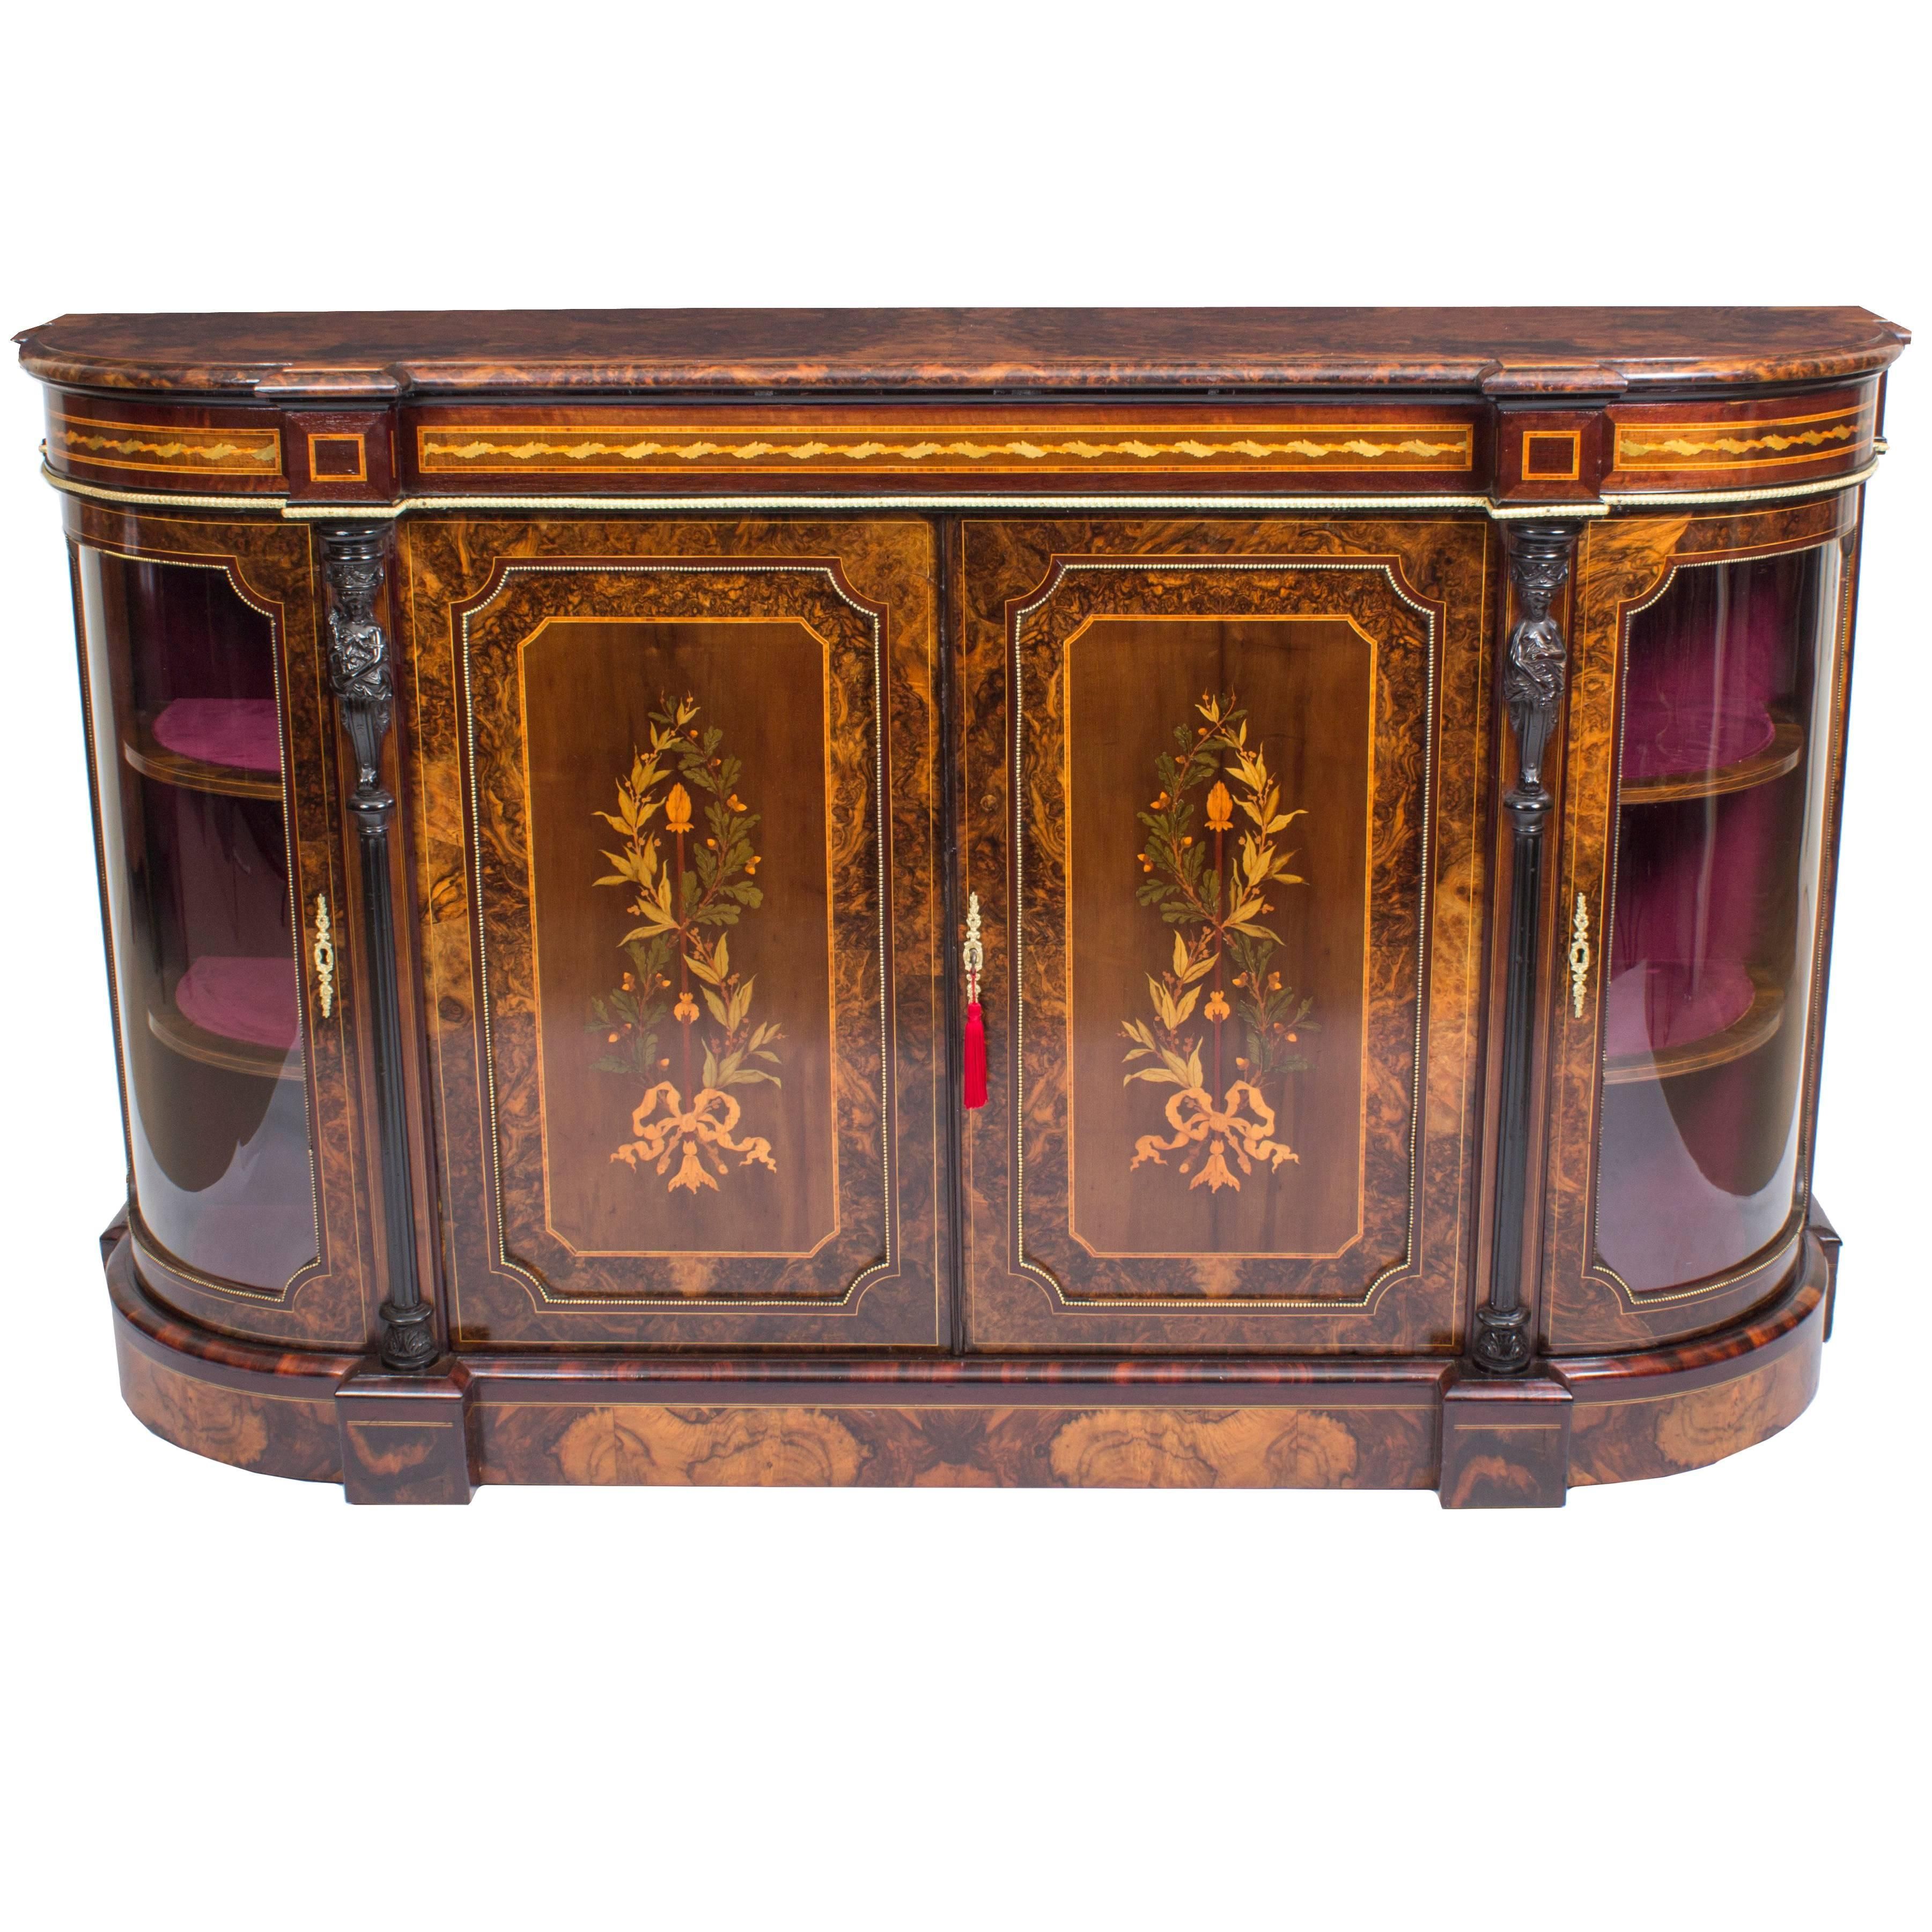 Stunning Quality Burr Walnut And Marquetry Inlaid Victorian Period Credenza In Purple Floral Credenzas (View 15 of 30)